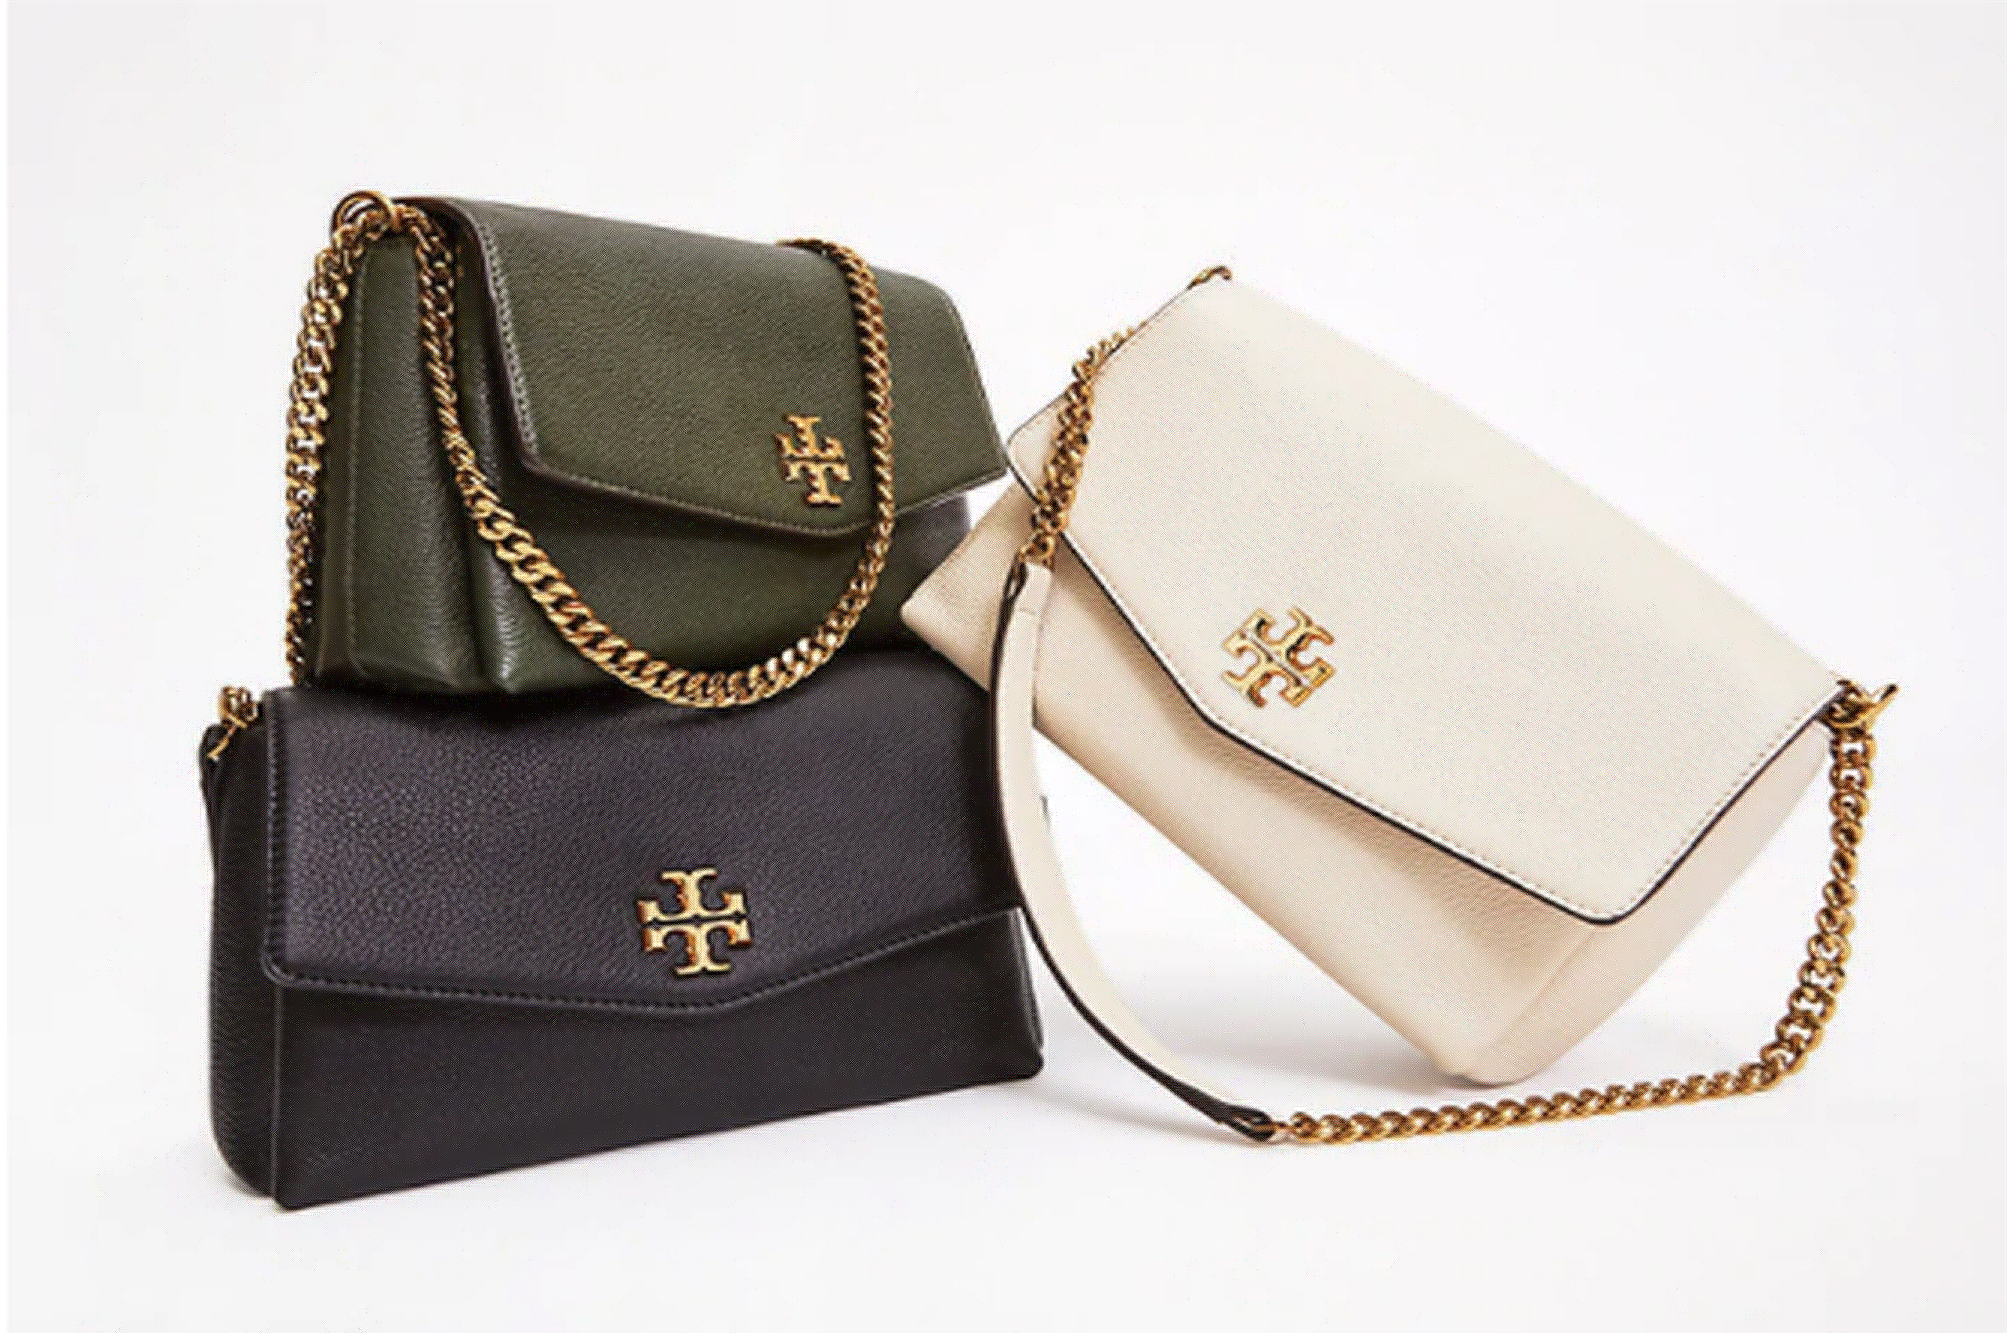 Tory Burch Fall Event: Score Up to 30 